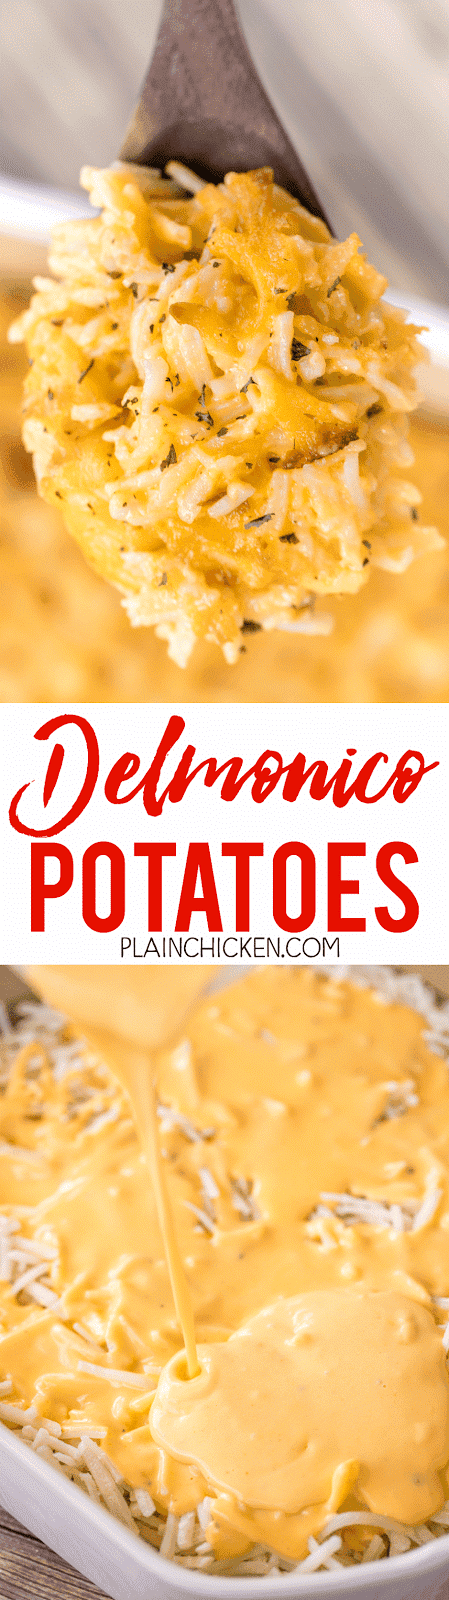 Delmonico Potatoes - the most AMAZING potatoes EVER!!! We have made these 3 times in the last month. They are simply the BEST!!! They are also super easy to make. You can make them ahead of time and refrigerate or freeze for later. Frozen hash brown potatoes, milk, heavy cream, dry mustard, salt, cheddar cheese. A new family favorite!